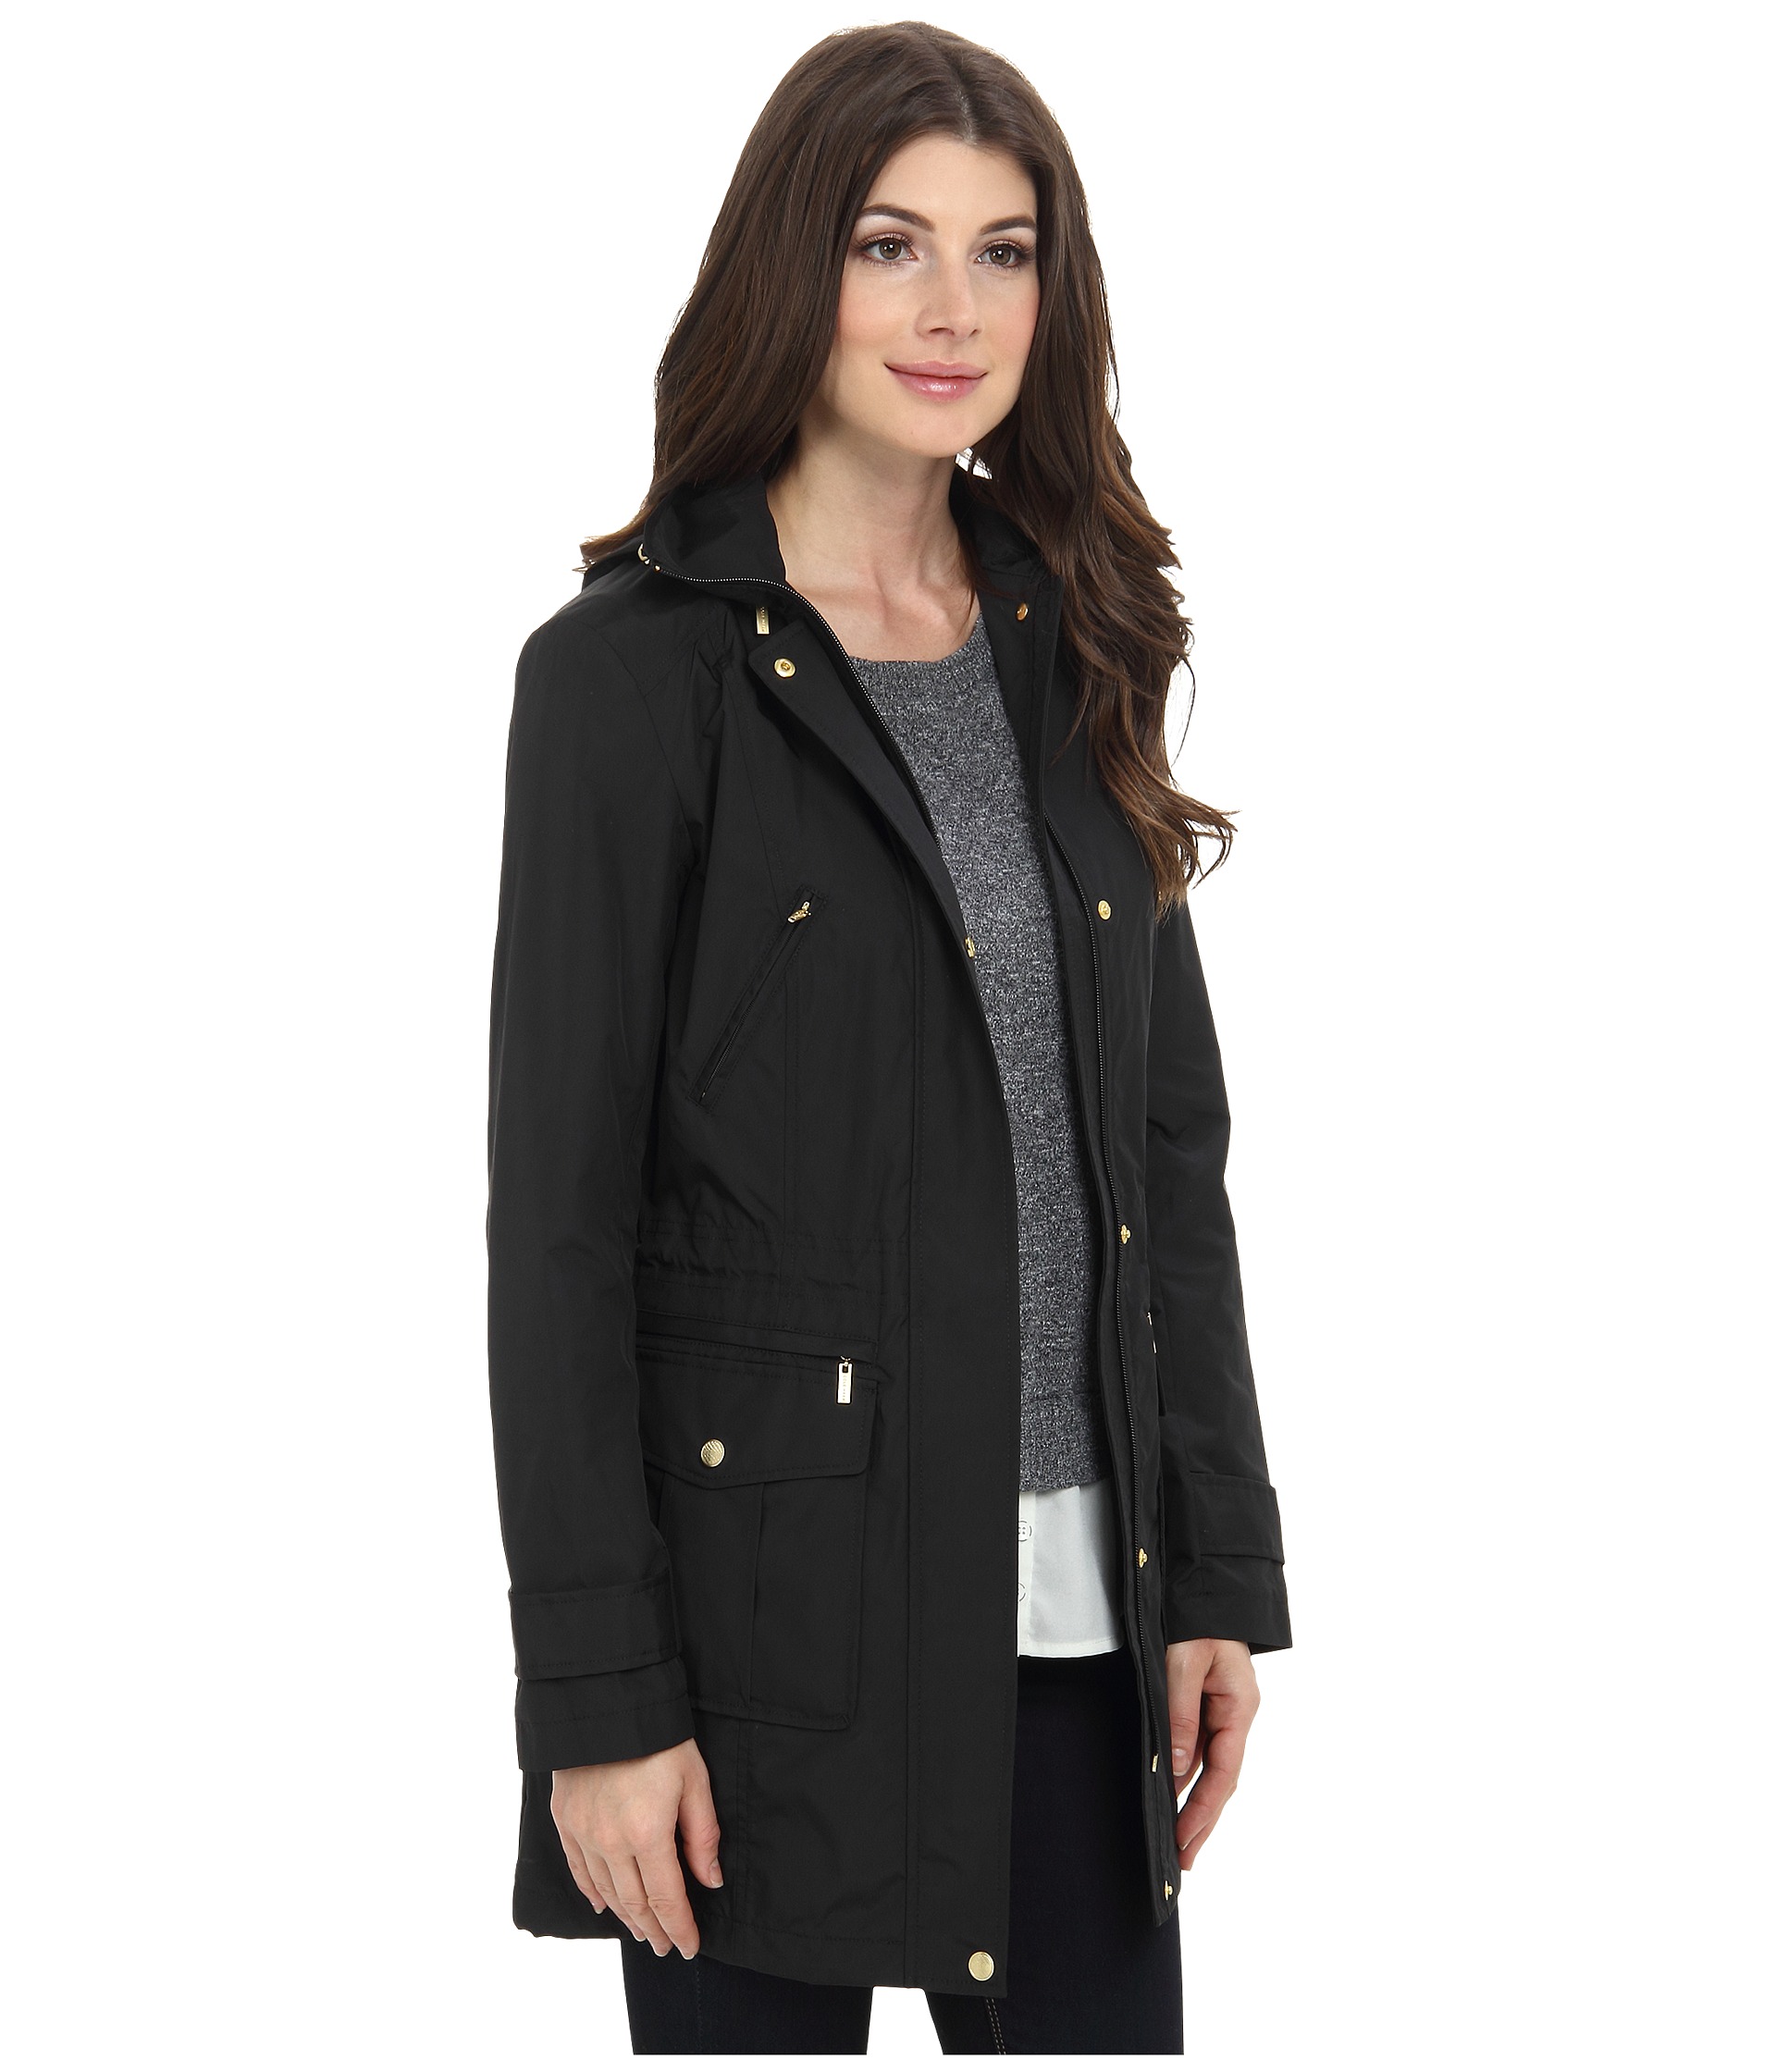 Cole Haan Travel Packable Rain Anorak Black | Shipped Free at Zappos